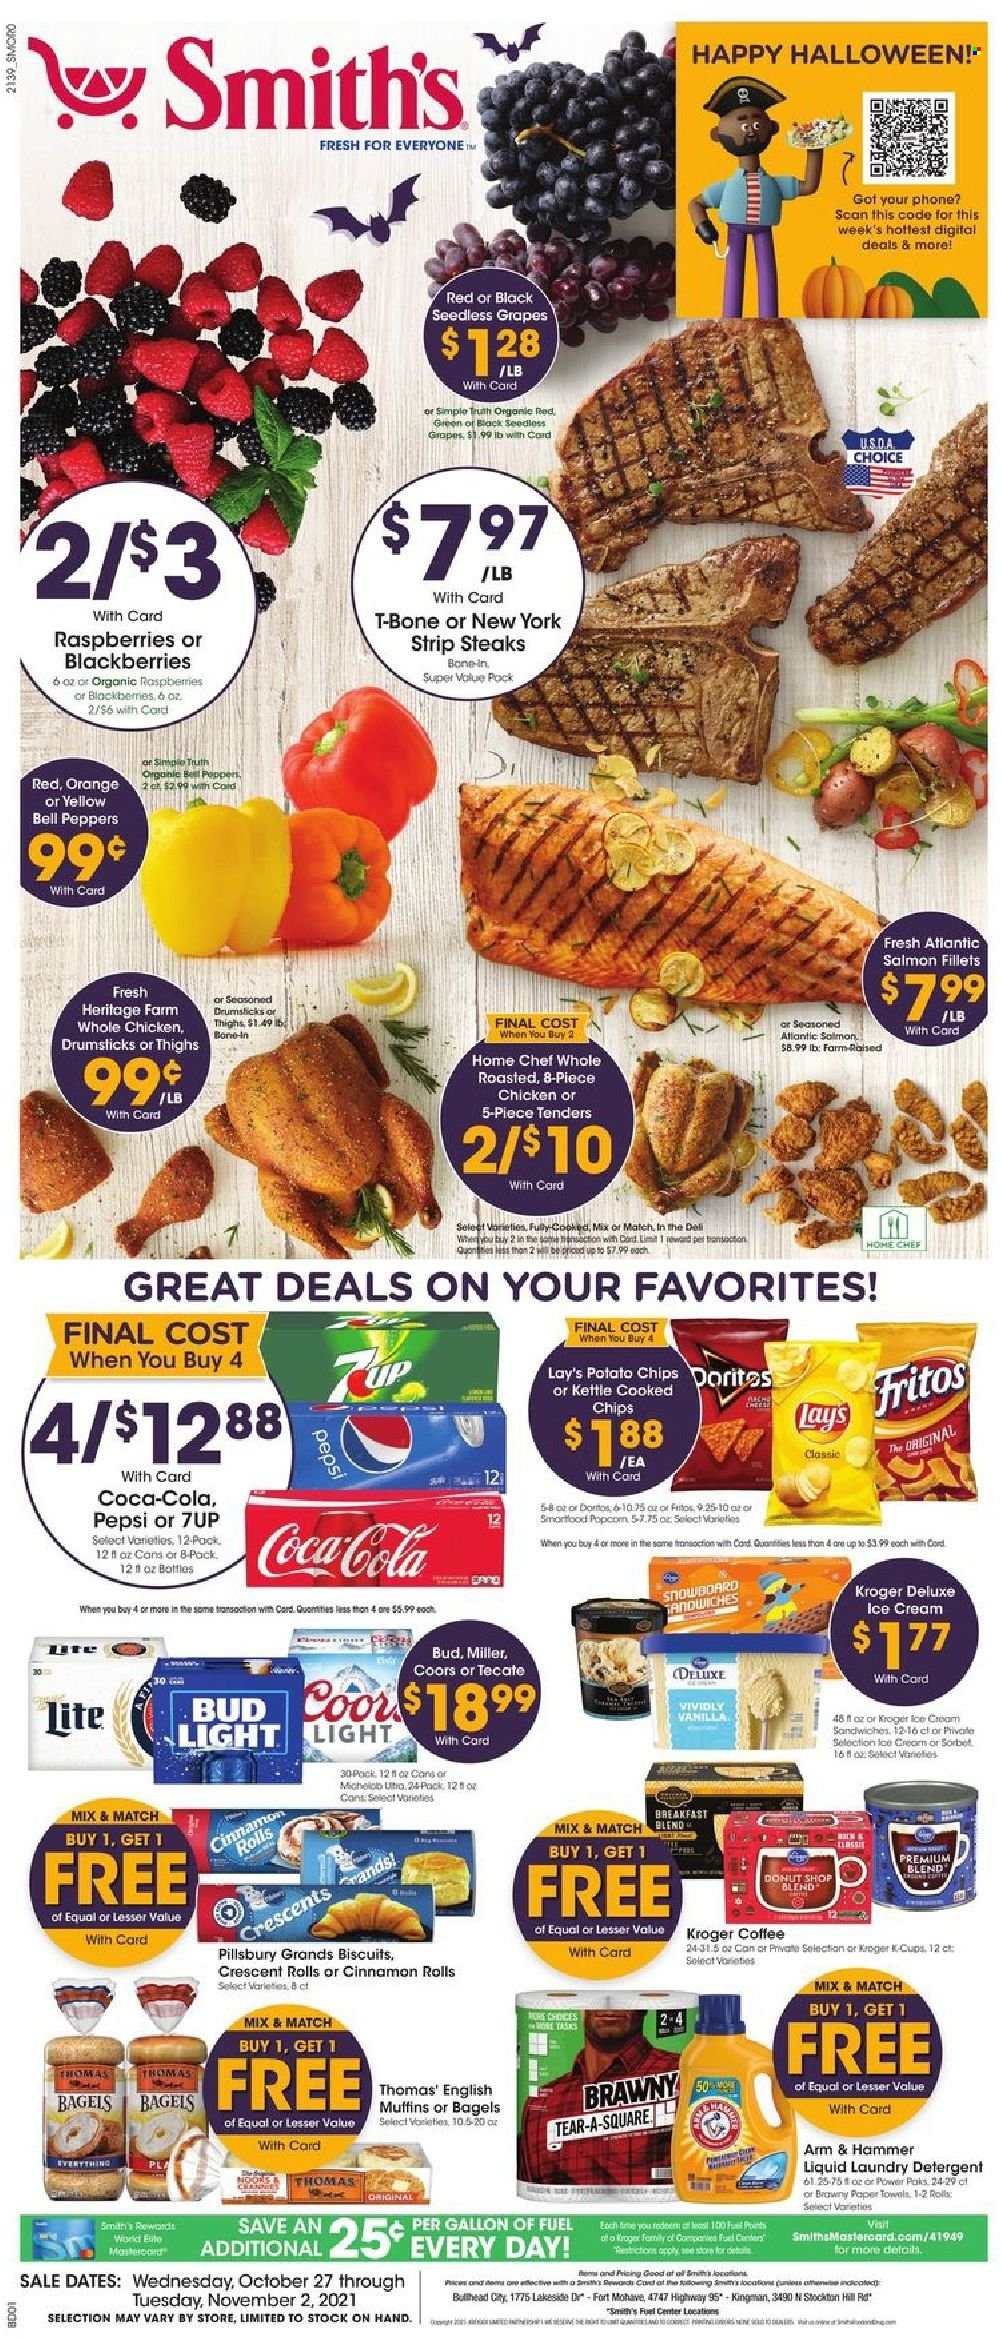 thumbnail - Smith's Flyer - 10/27/2021 - 11/02/2021 - Sales products - seedless grapes, bagels, english muffins, cinnamon roll, crescent rolls, bell peppers, peppers, blackberries, grapes, oranges, salmon, salmon fillet, Pillsbury, ice cream, biscuit, Fritos, potato chips, chips, Lay’s, ARM & HAMMER, Coca-Cola, Pepsi, 7UP, coffee, beer, Miller, whole chicken, beef meat, t-bone steak, steak, striploin steak, kitchen towels, paper towels, detergent, laundry detergent, Coors. Page 1.